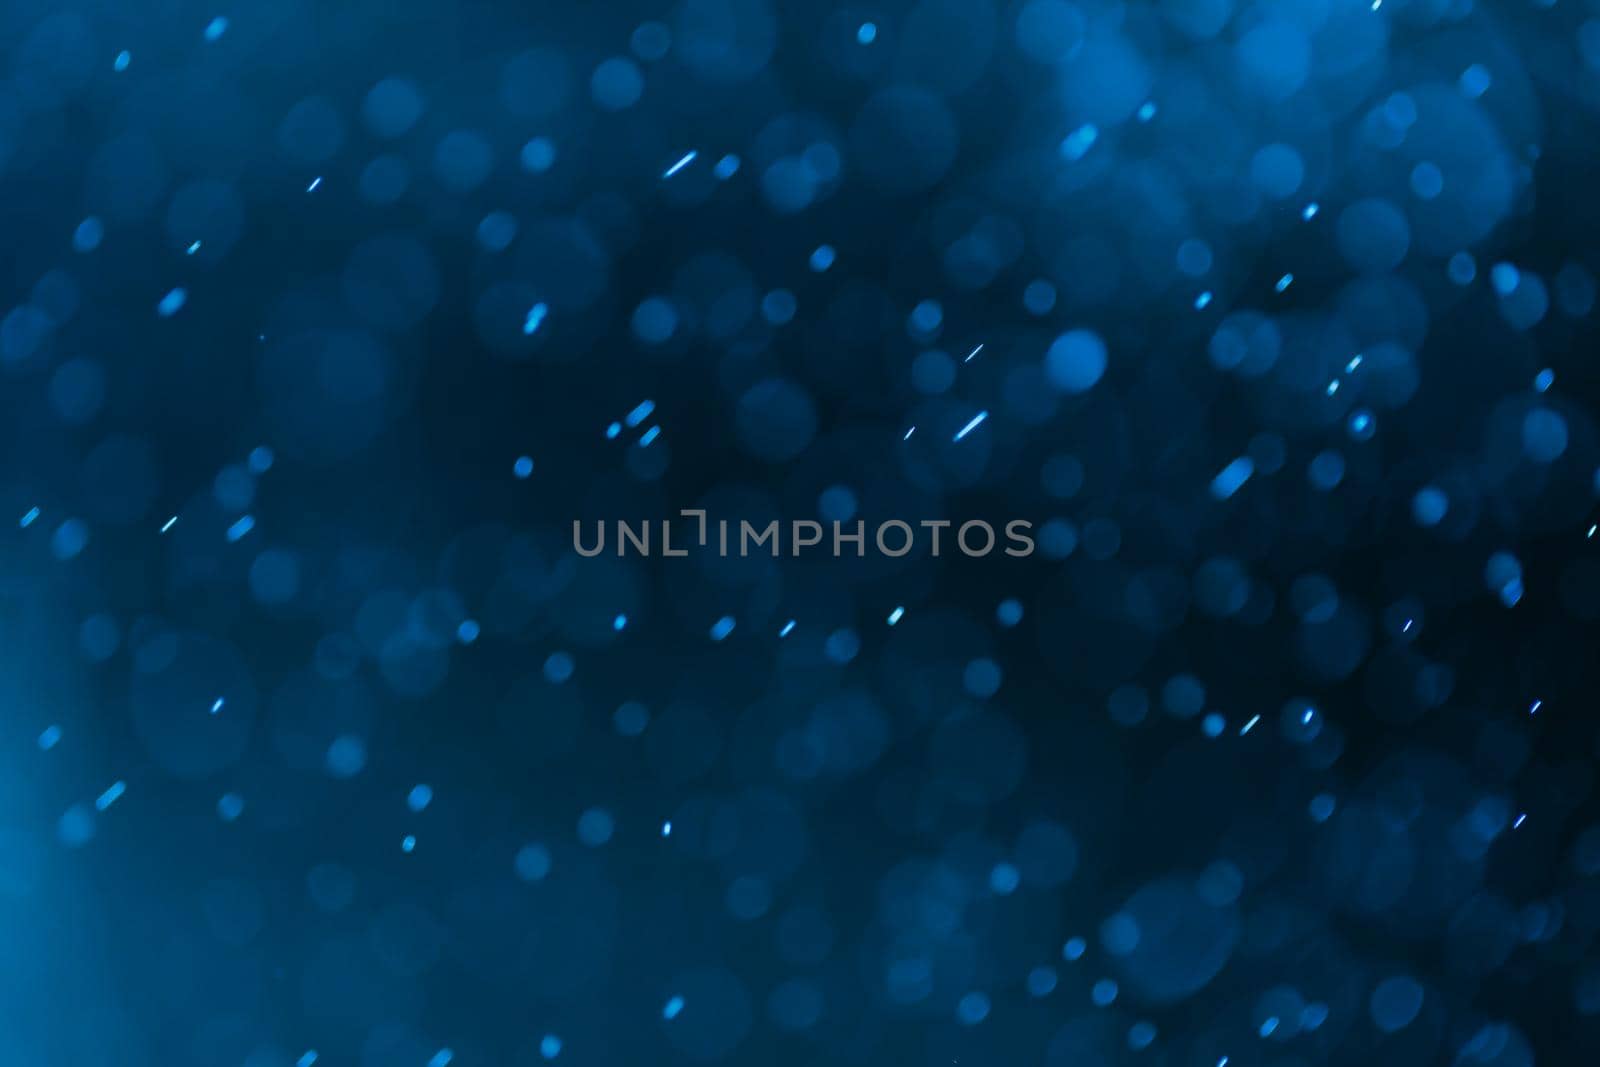 Bokeh blurred light abstract background